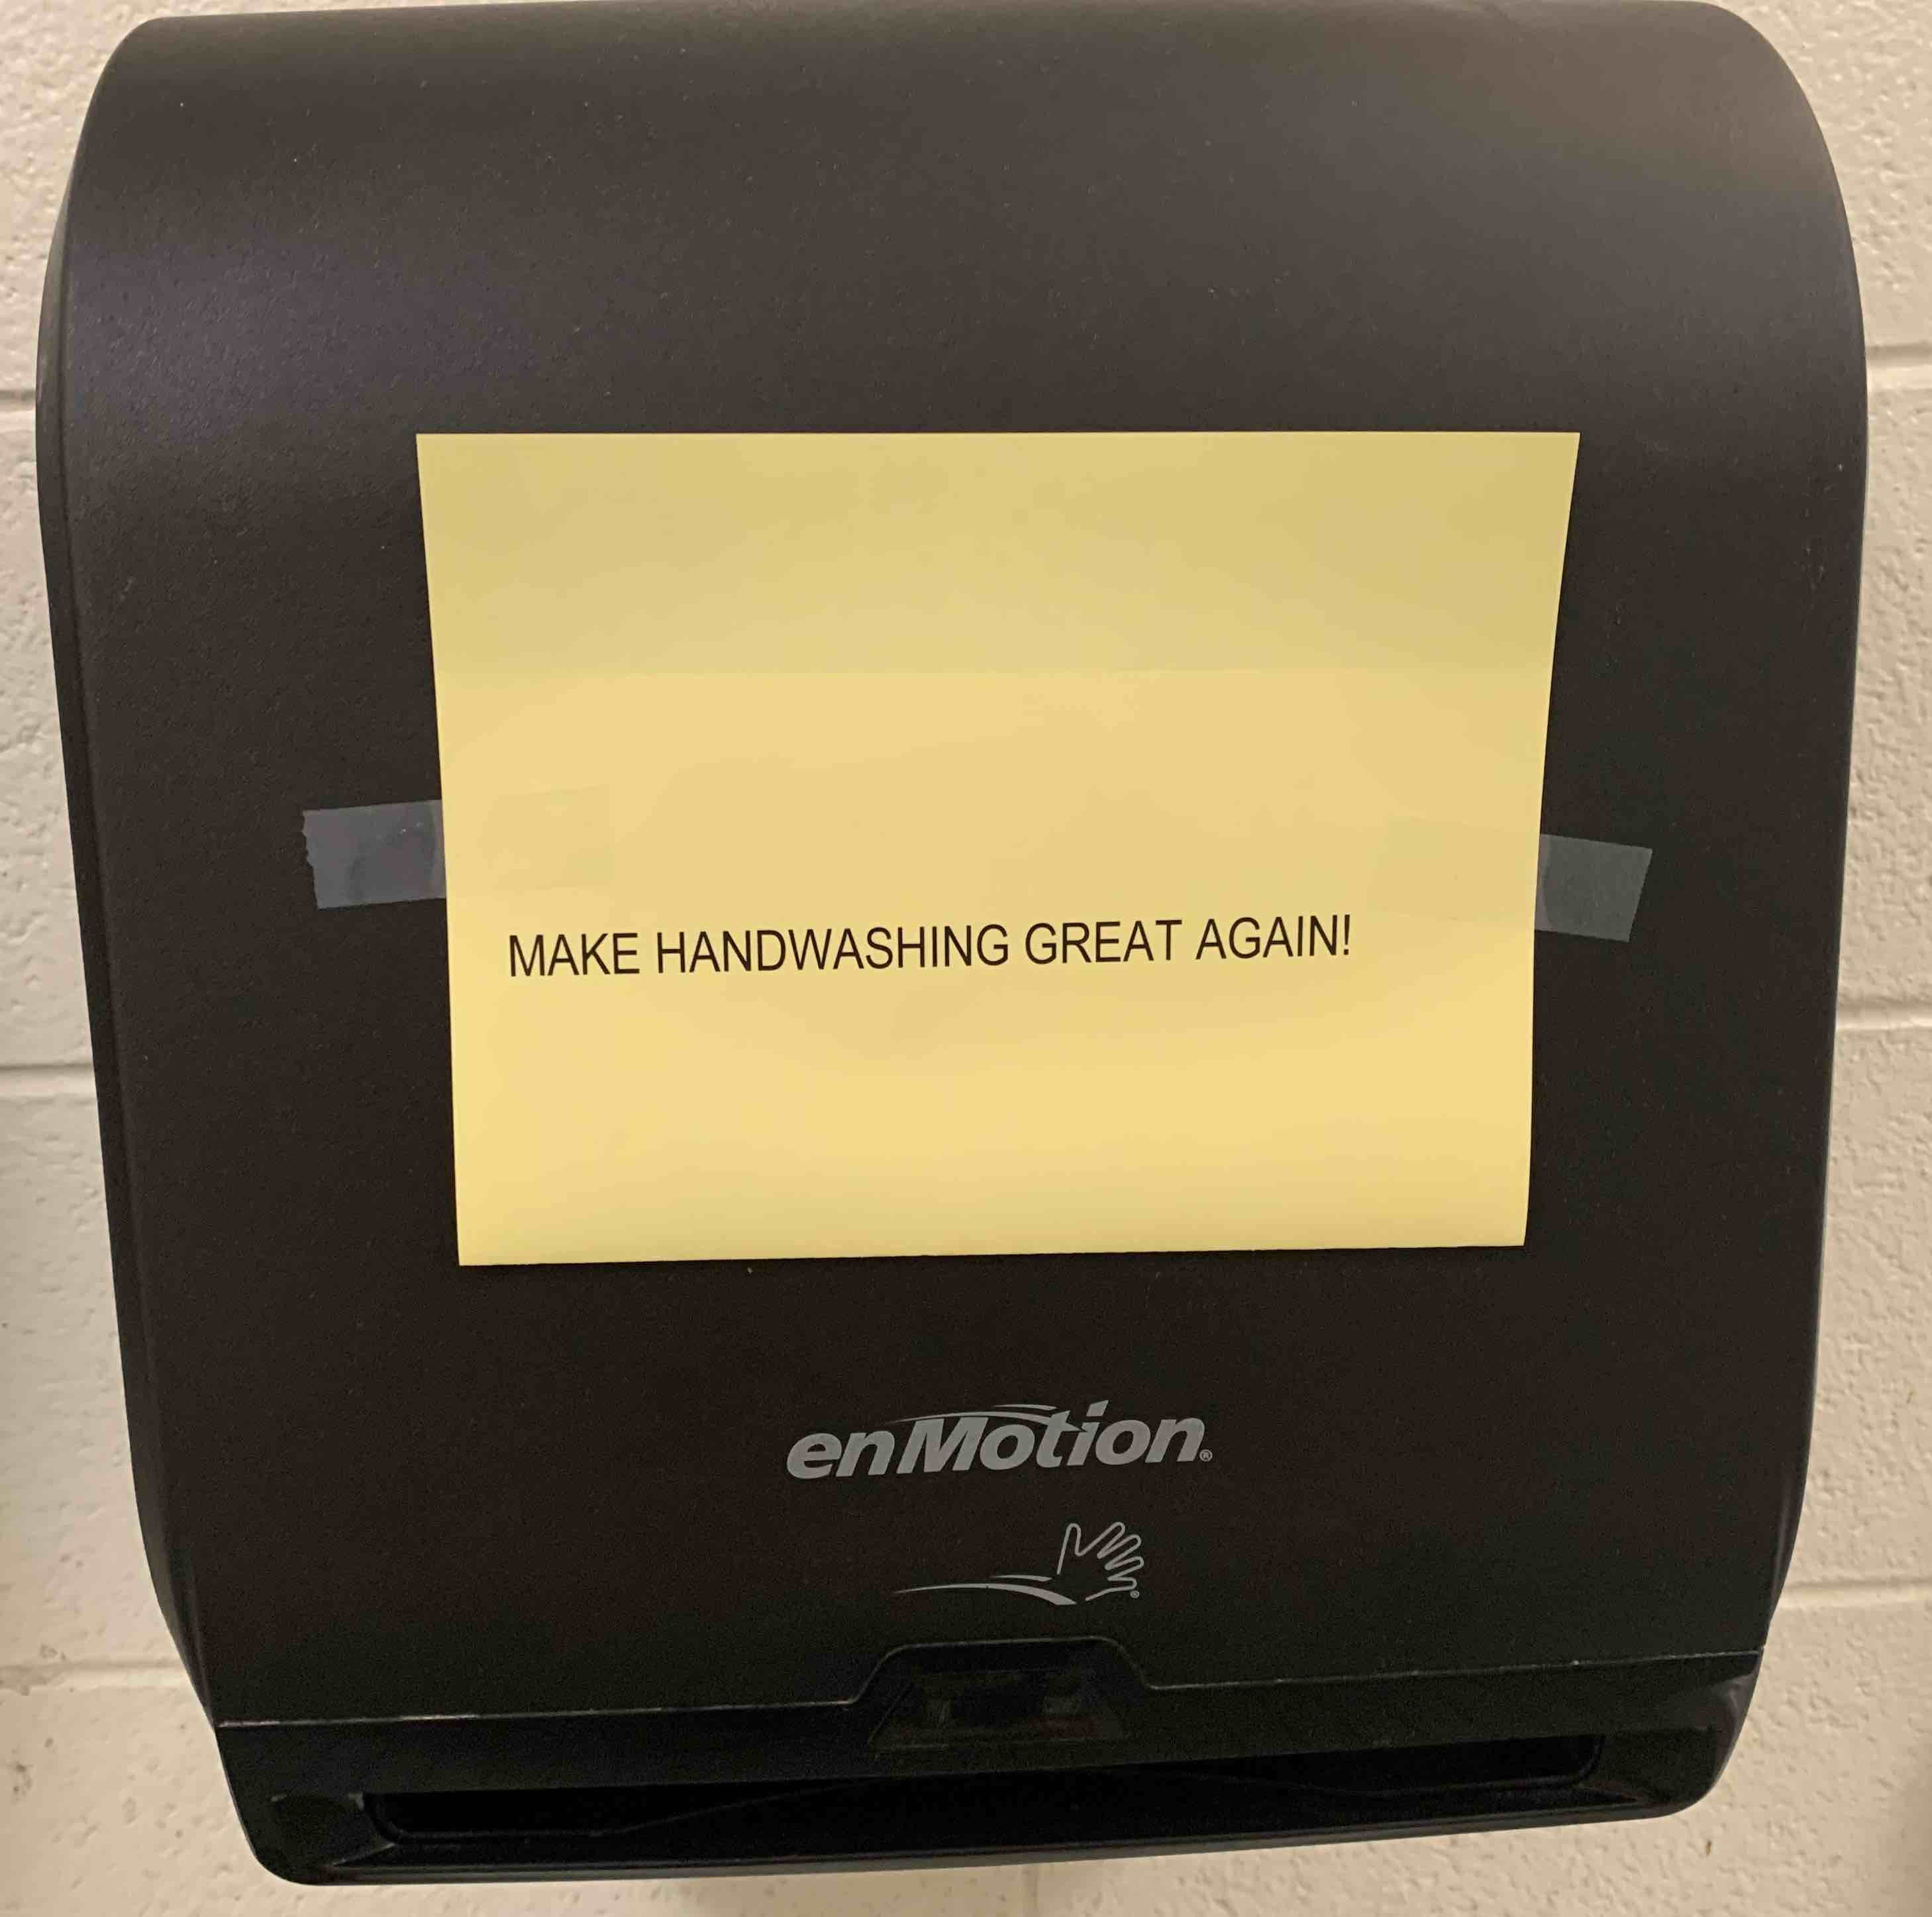 The post-it reads: Make Hand-washing great again